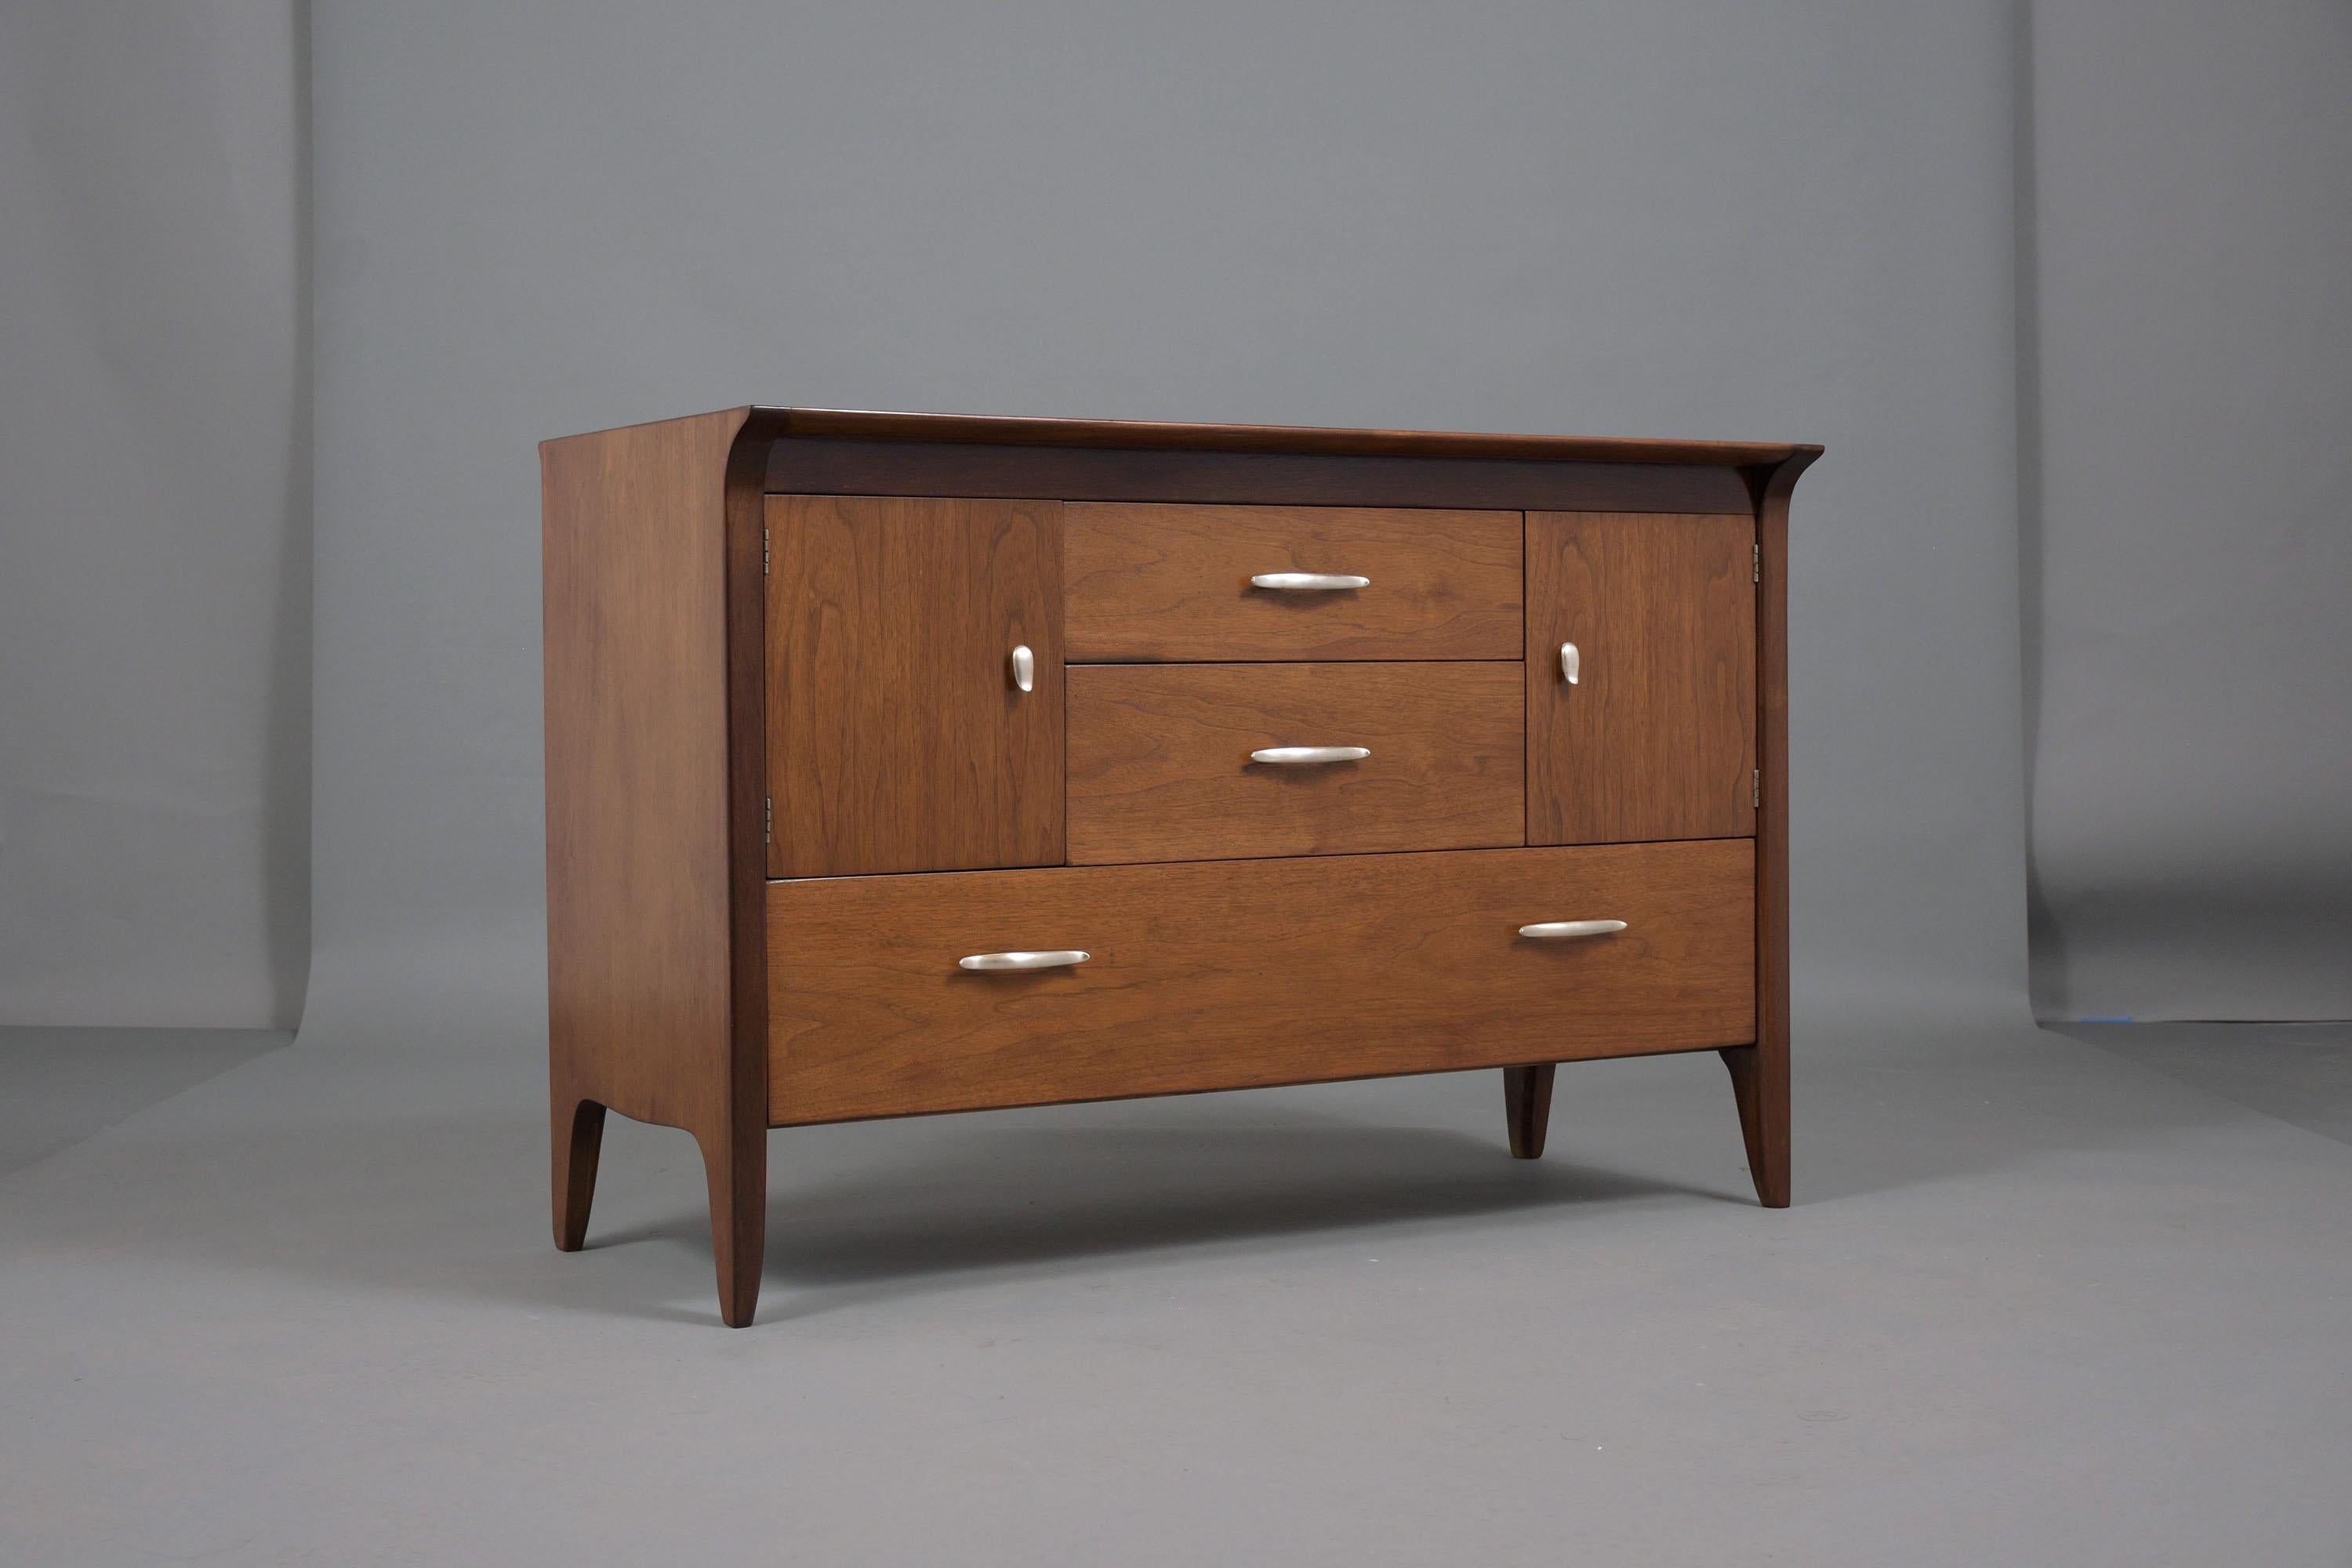 Discover the timeless elegance of the 1960s with our Mid-Century Modern Walnut Chest of Drawers, a masterpiece that has been masterfully restored to reflect the unique blend of style and craftsmanship of the era. Crafted from premium walnut, this